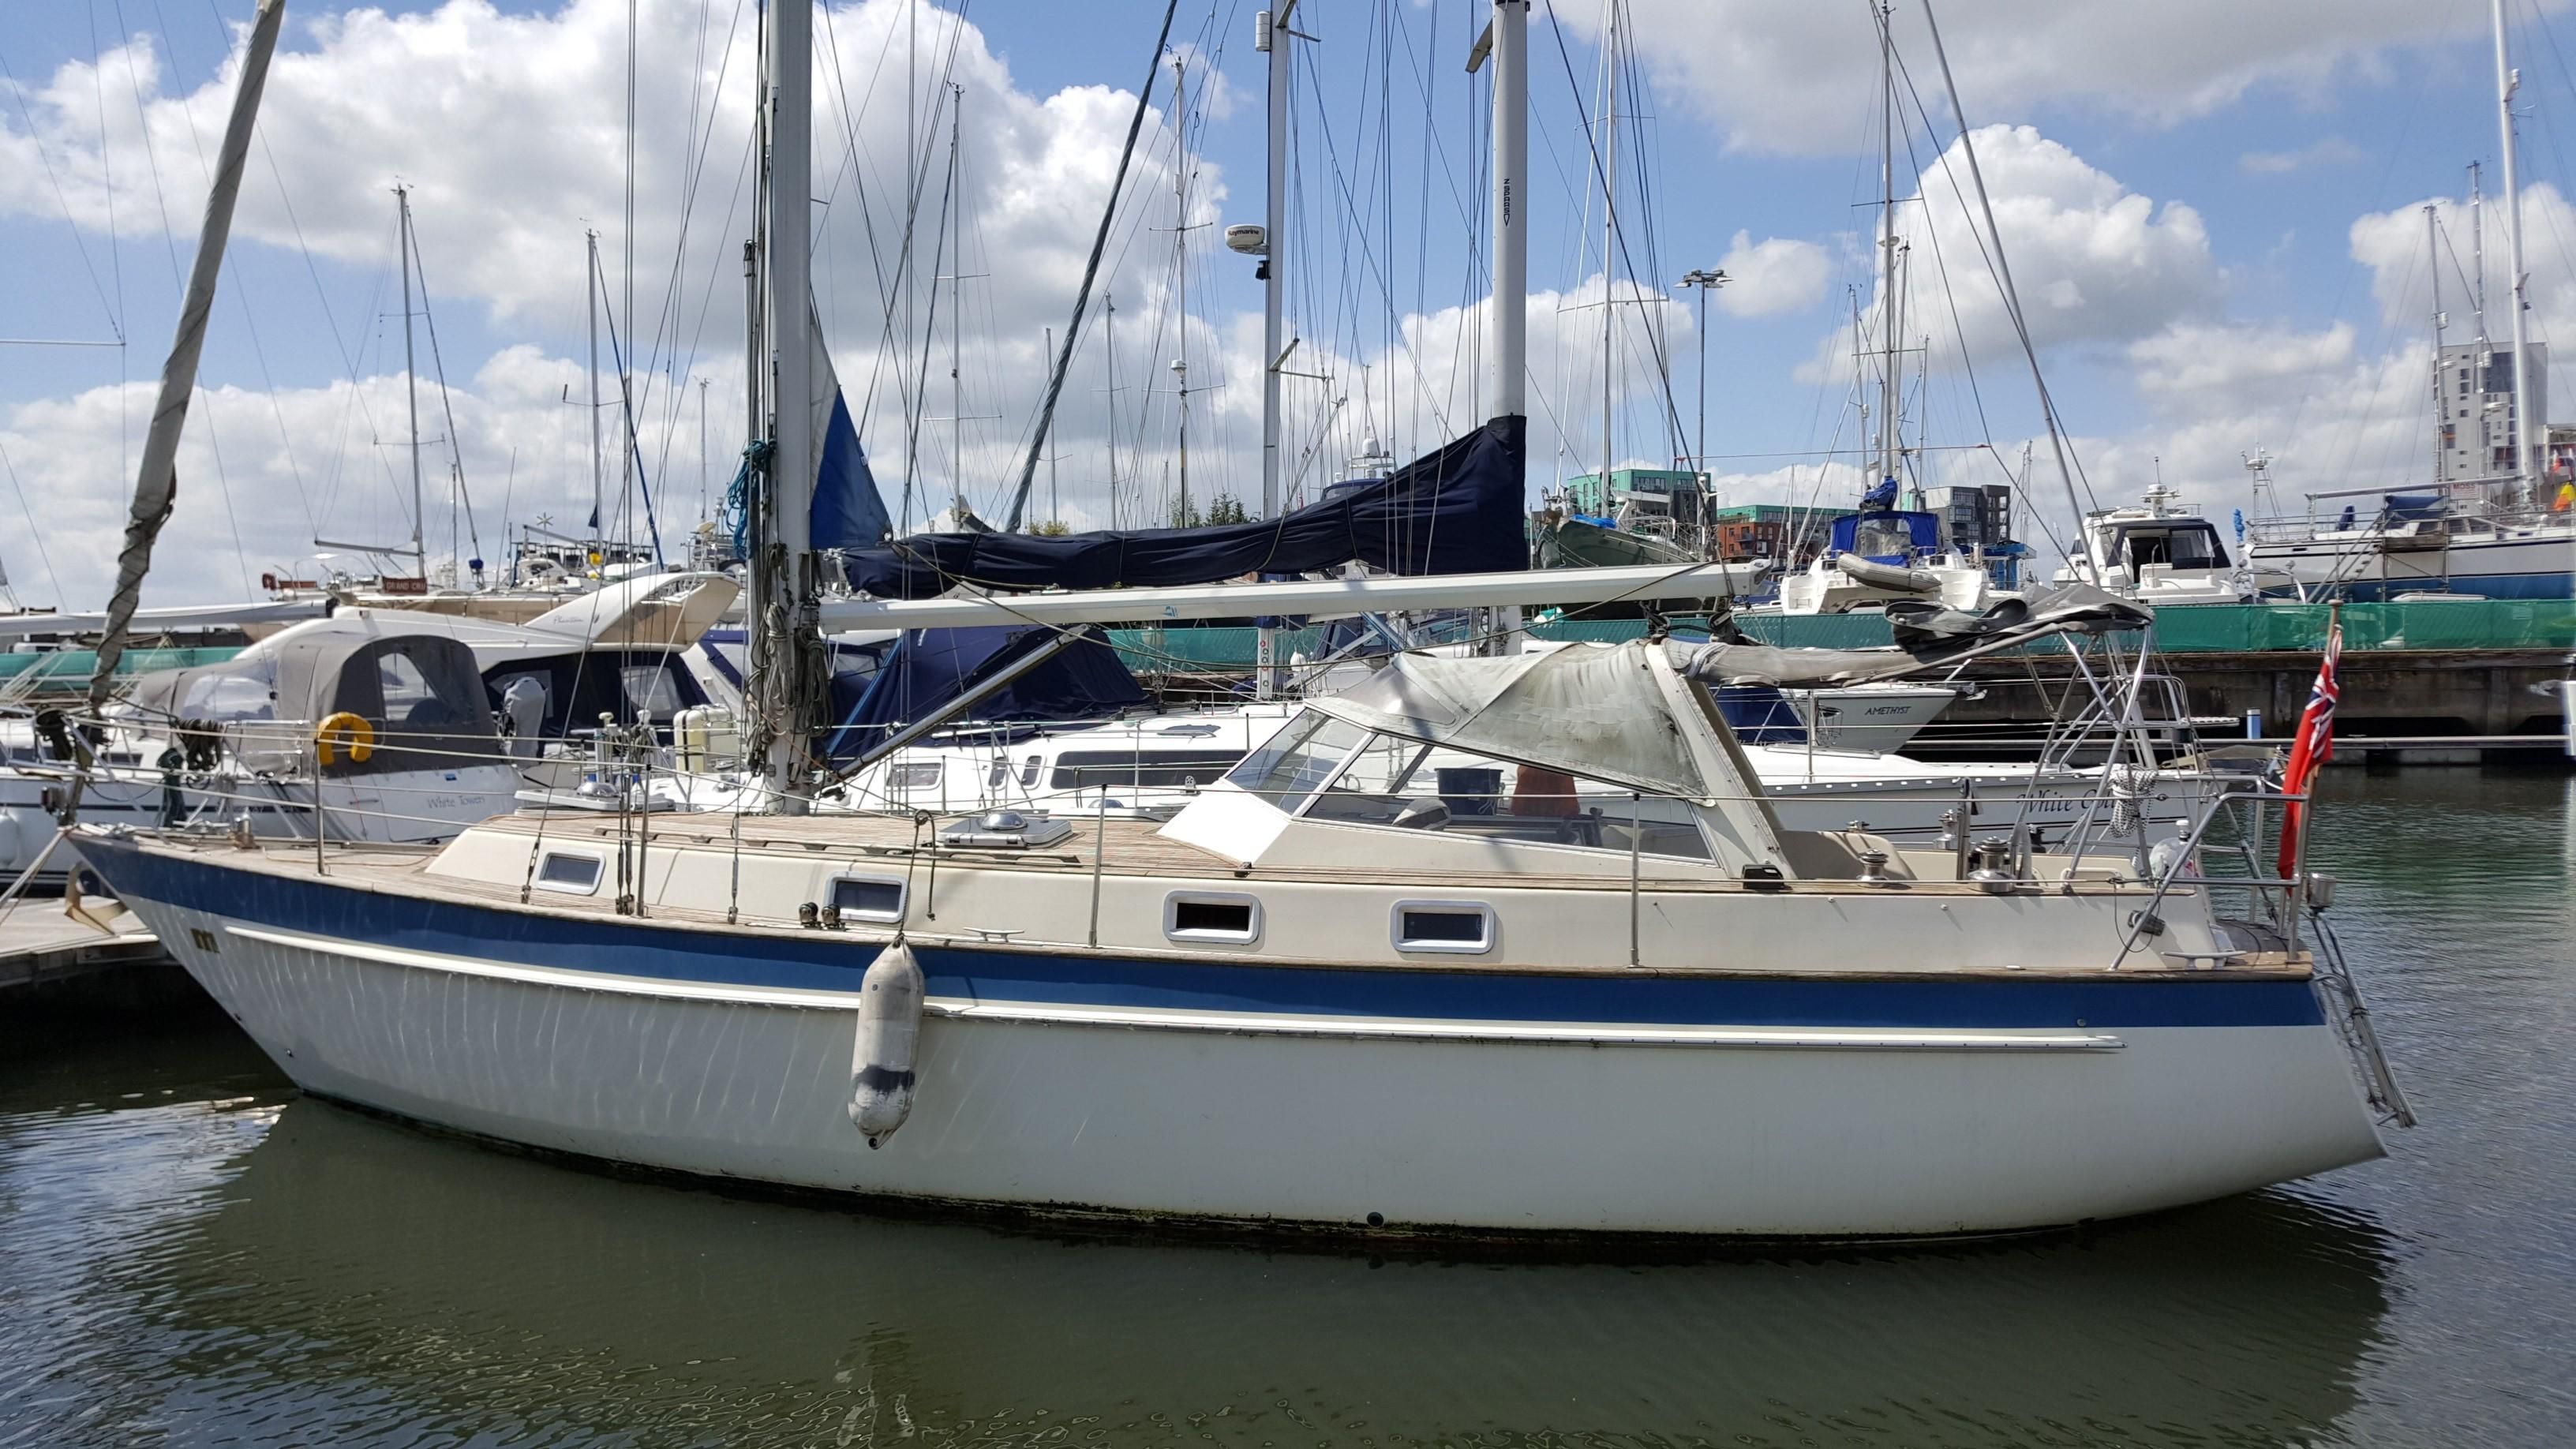 malo yachts for sale uk